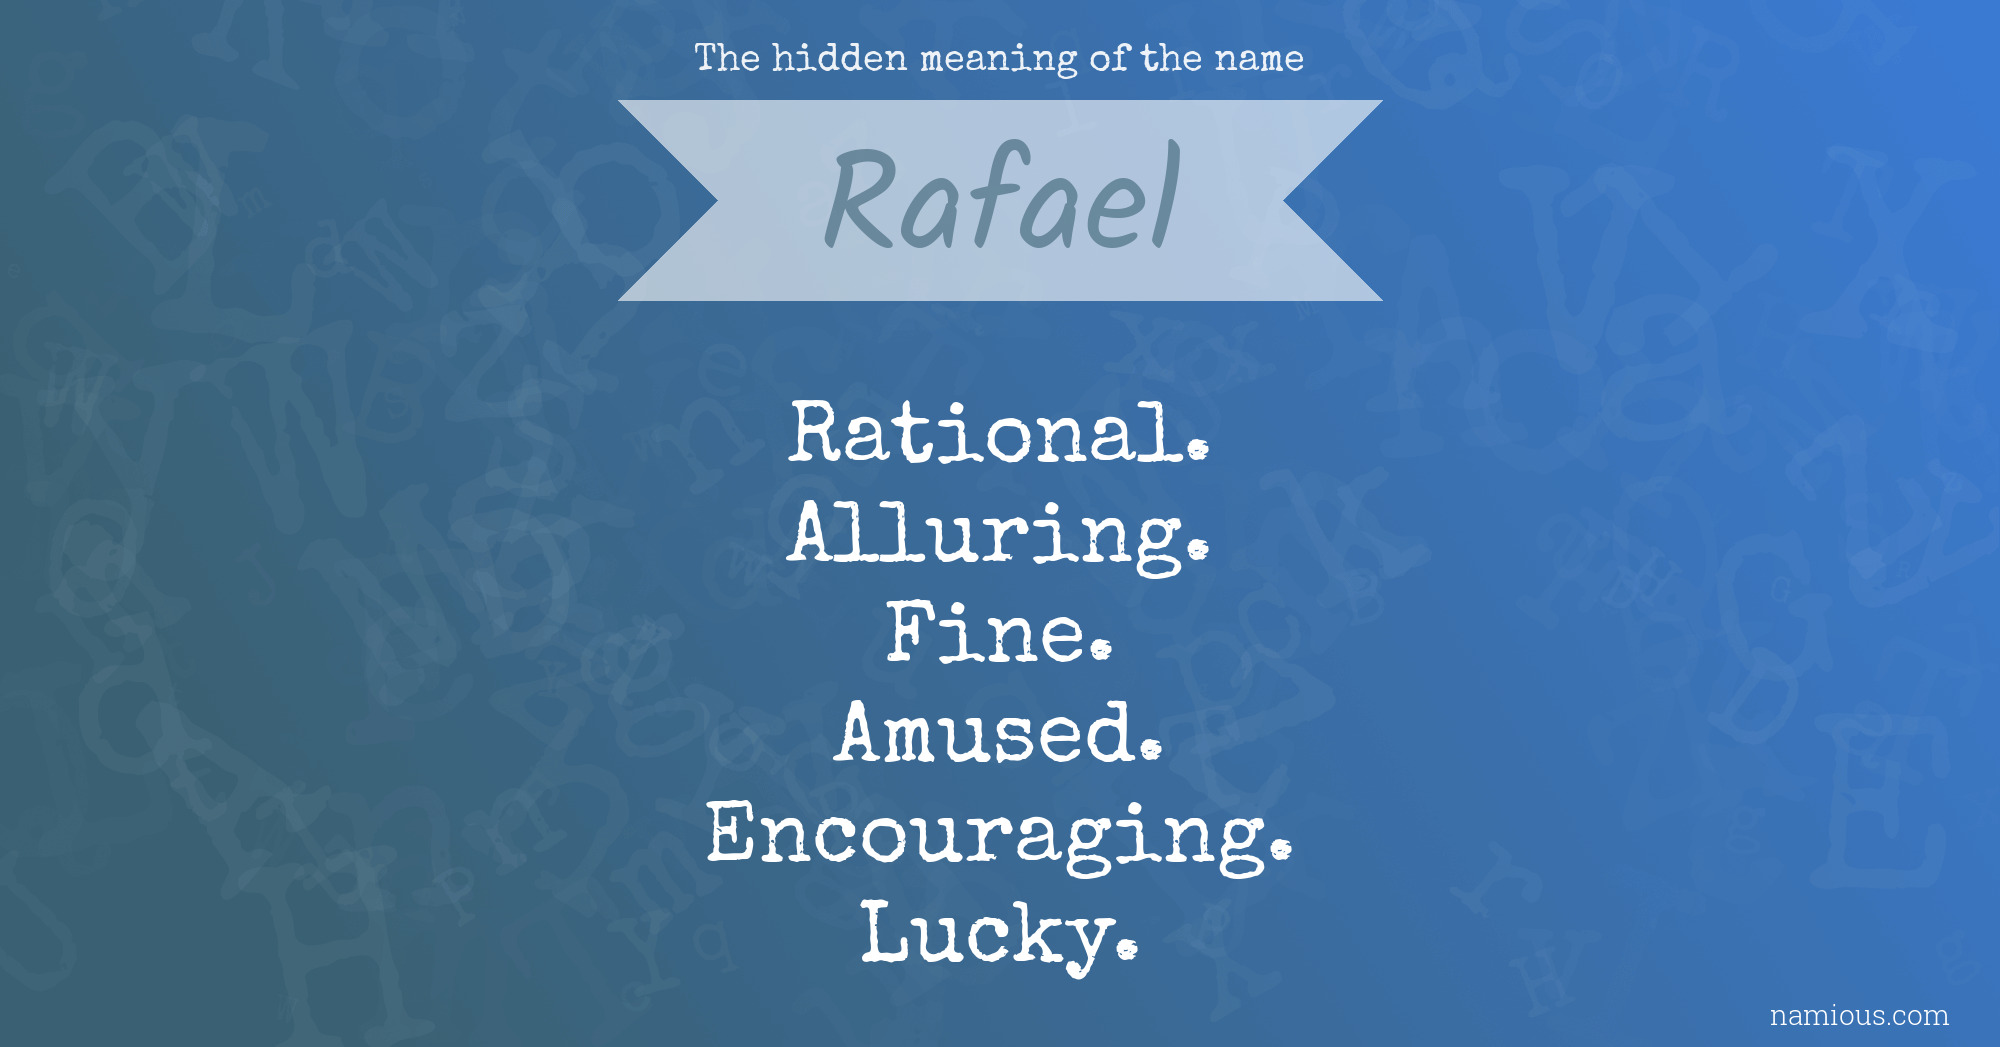 The hidden meaning of the name Rafael